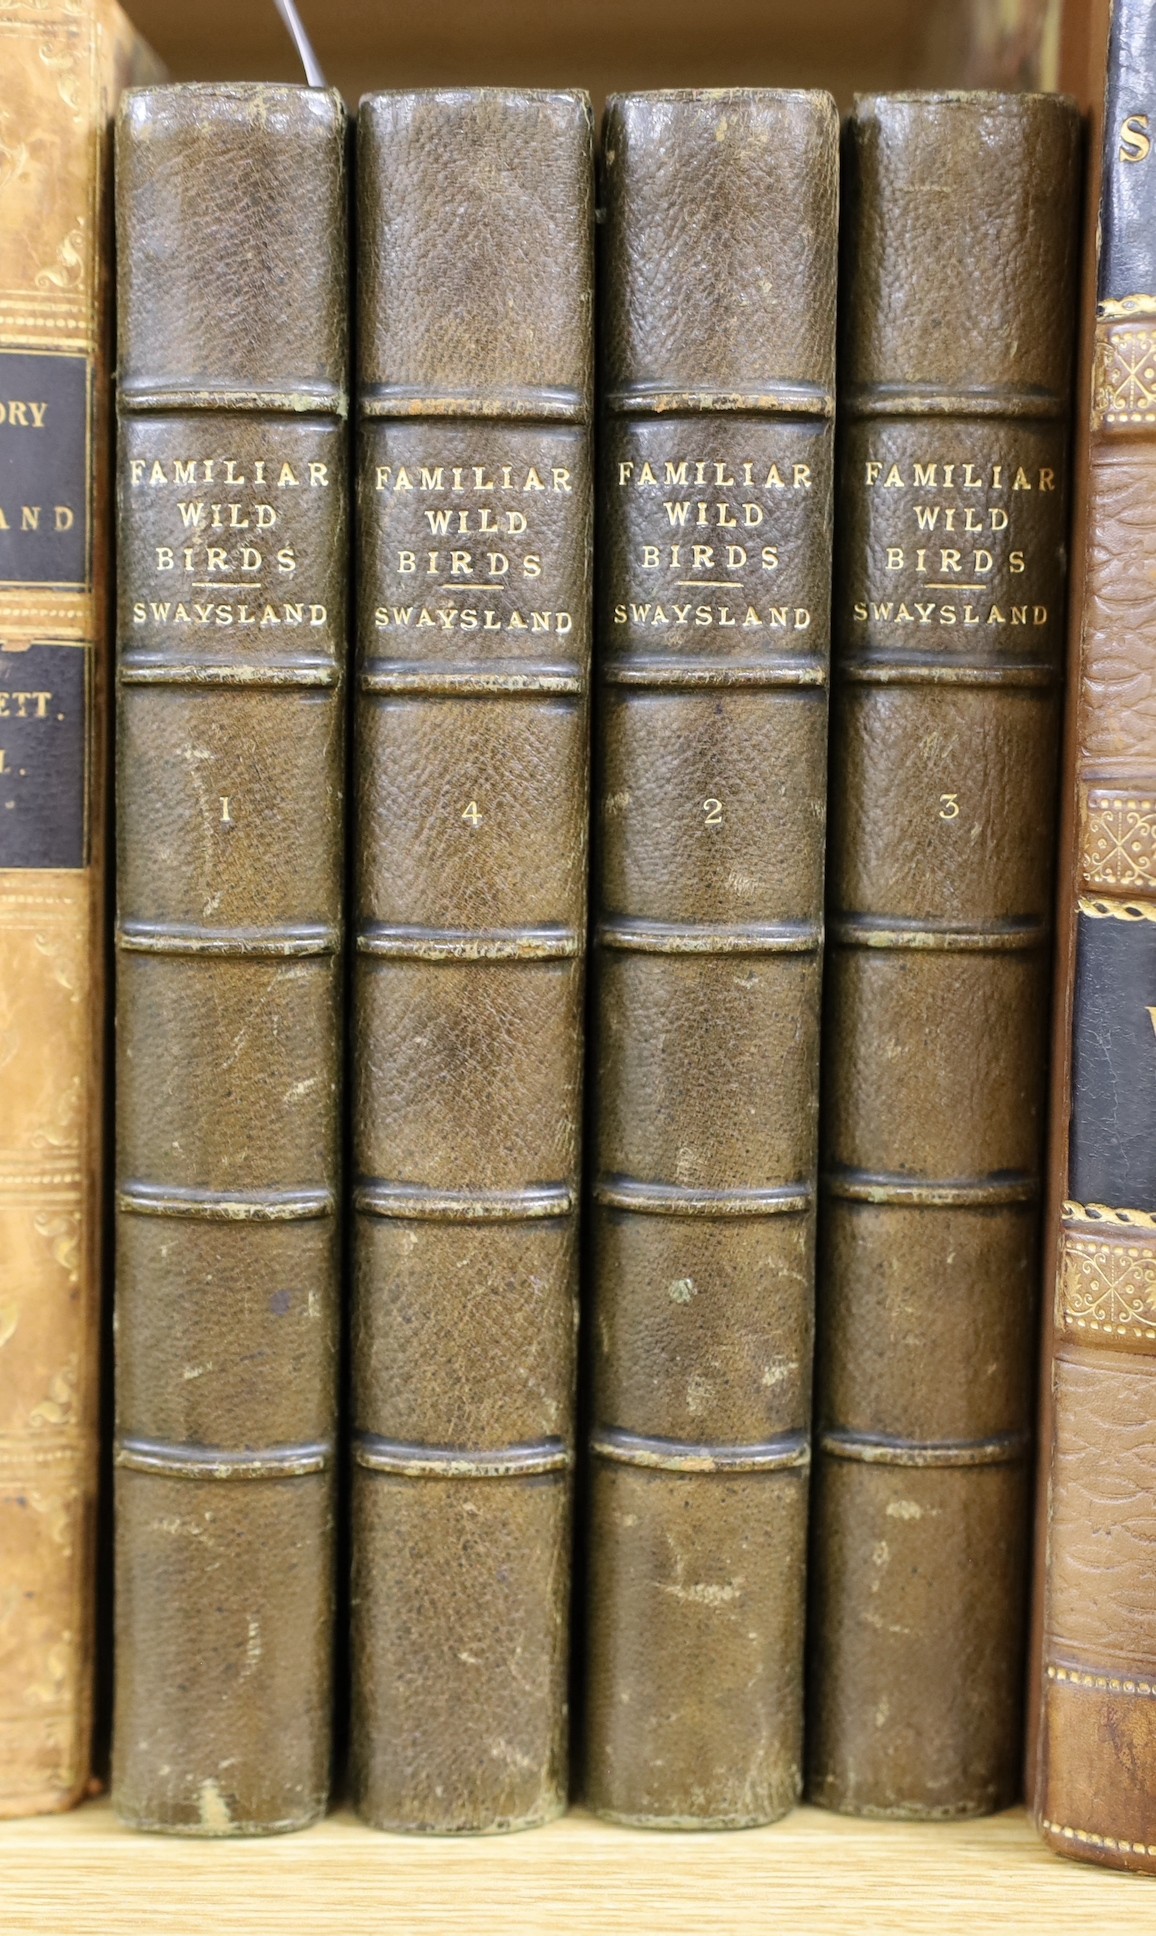 Swaysland, Walter - Familiar Wild Birds, series 1-4 in 4 vols, 8vo, half calf, with 160 tissue guarded coloured plates, Cassell & Company, Ltd., London, 1883 - [88?]